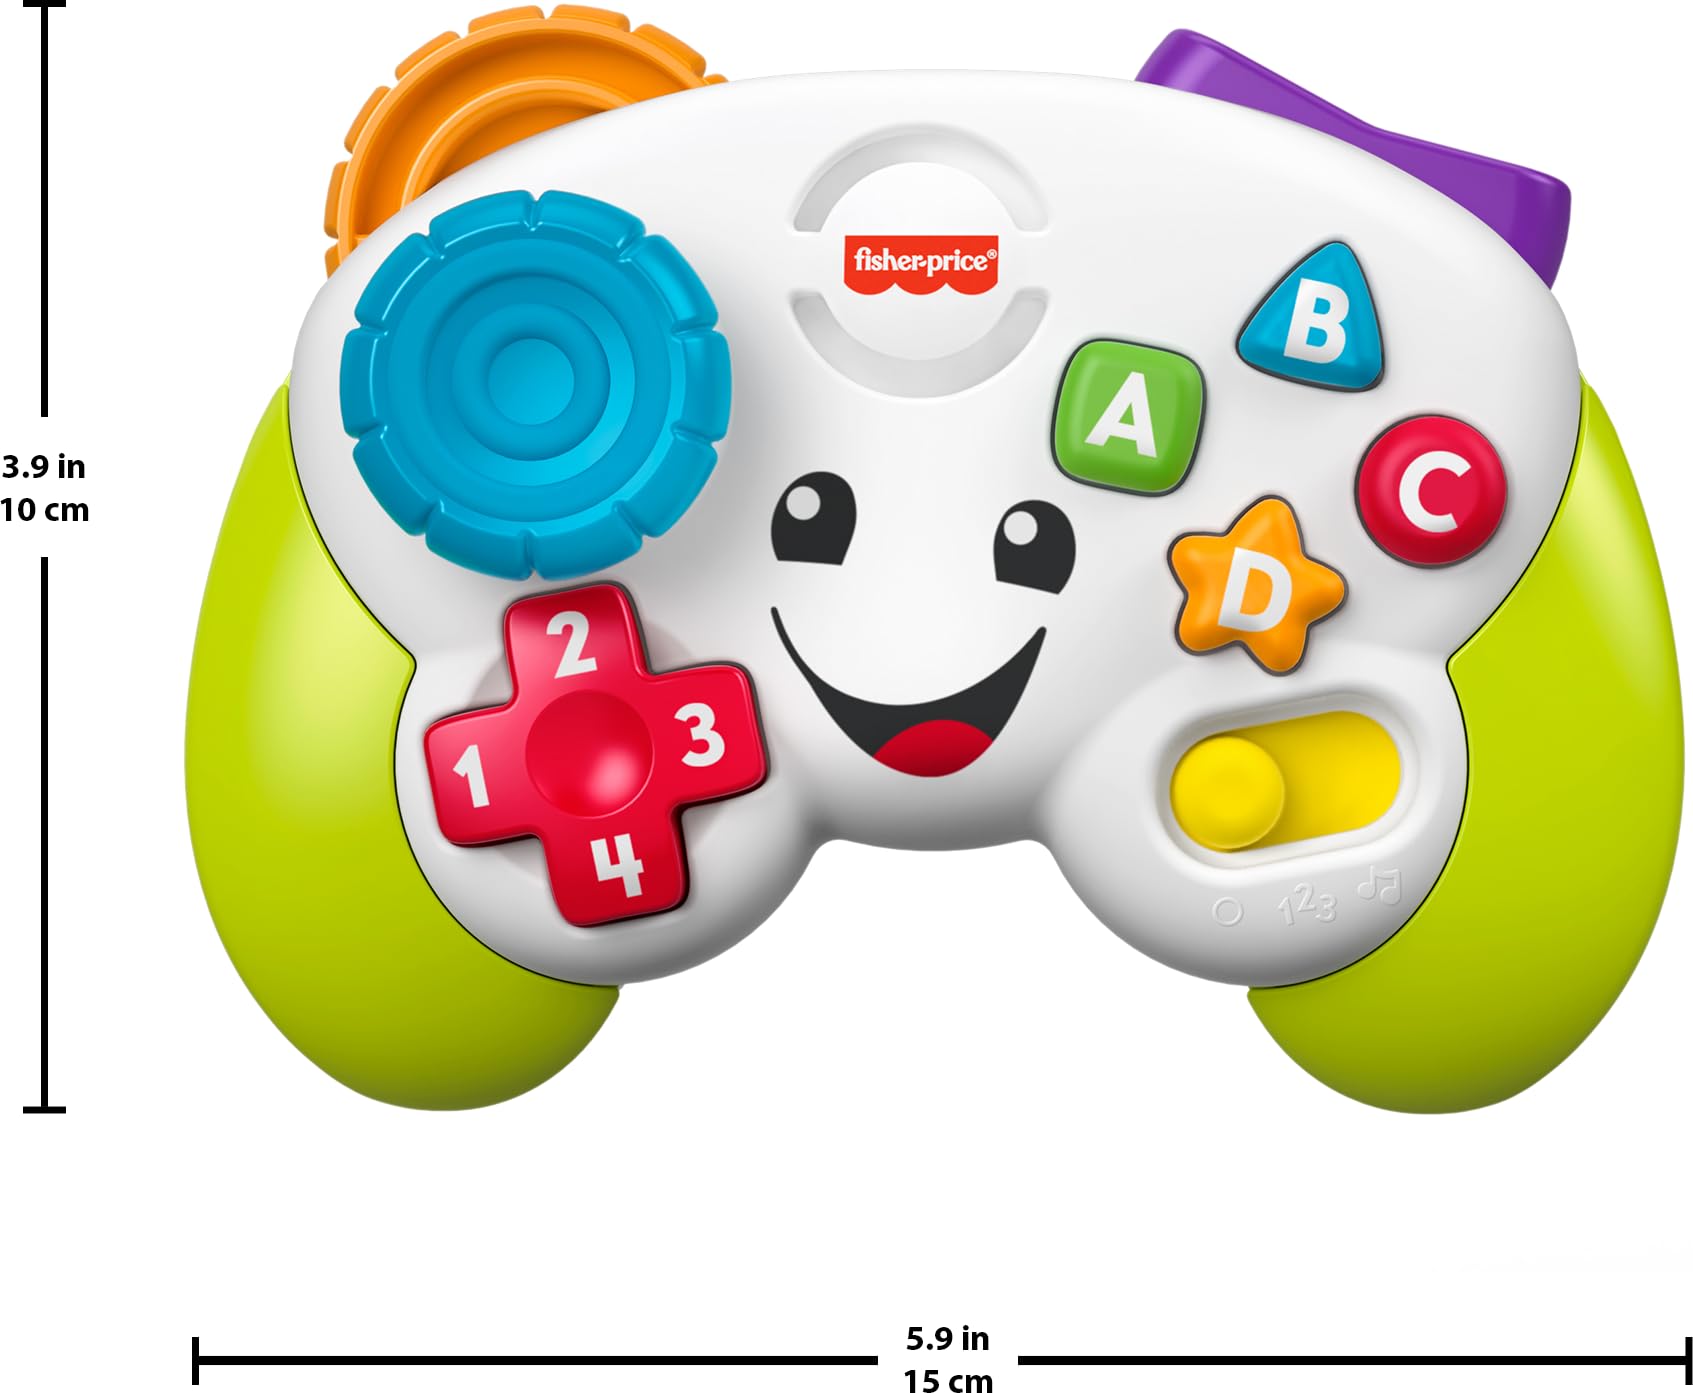 Fisher-Price Laugh & Learn Baby Electronic Toy, Game & Learn Controller Pretend Video Game with Lights and Music for Ages 6 Months+